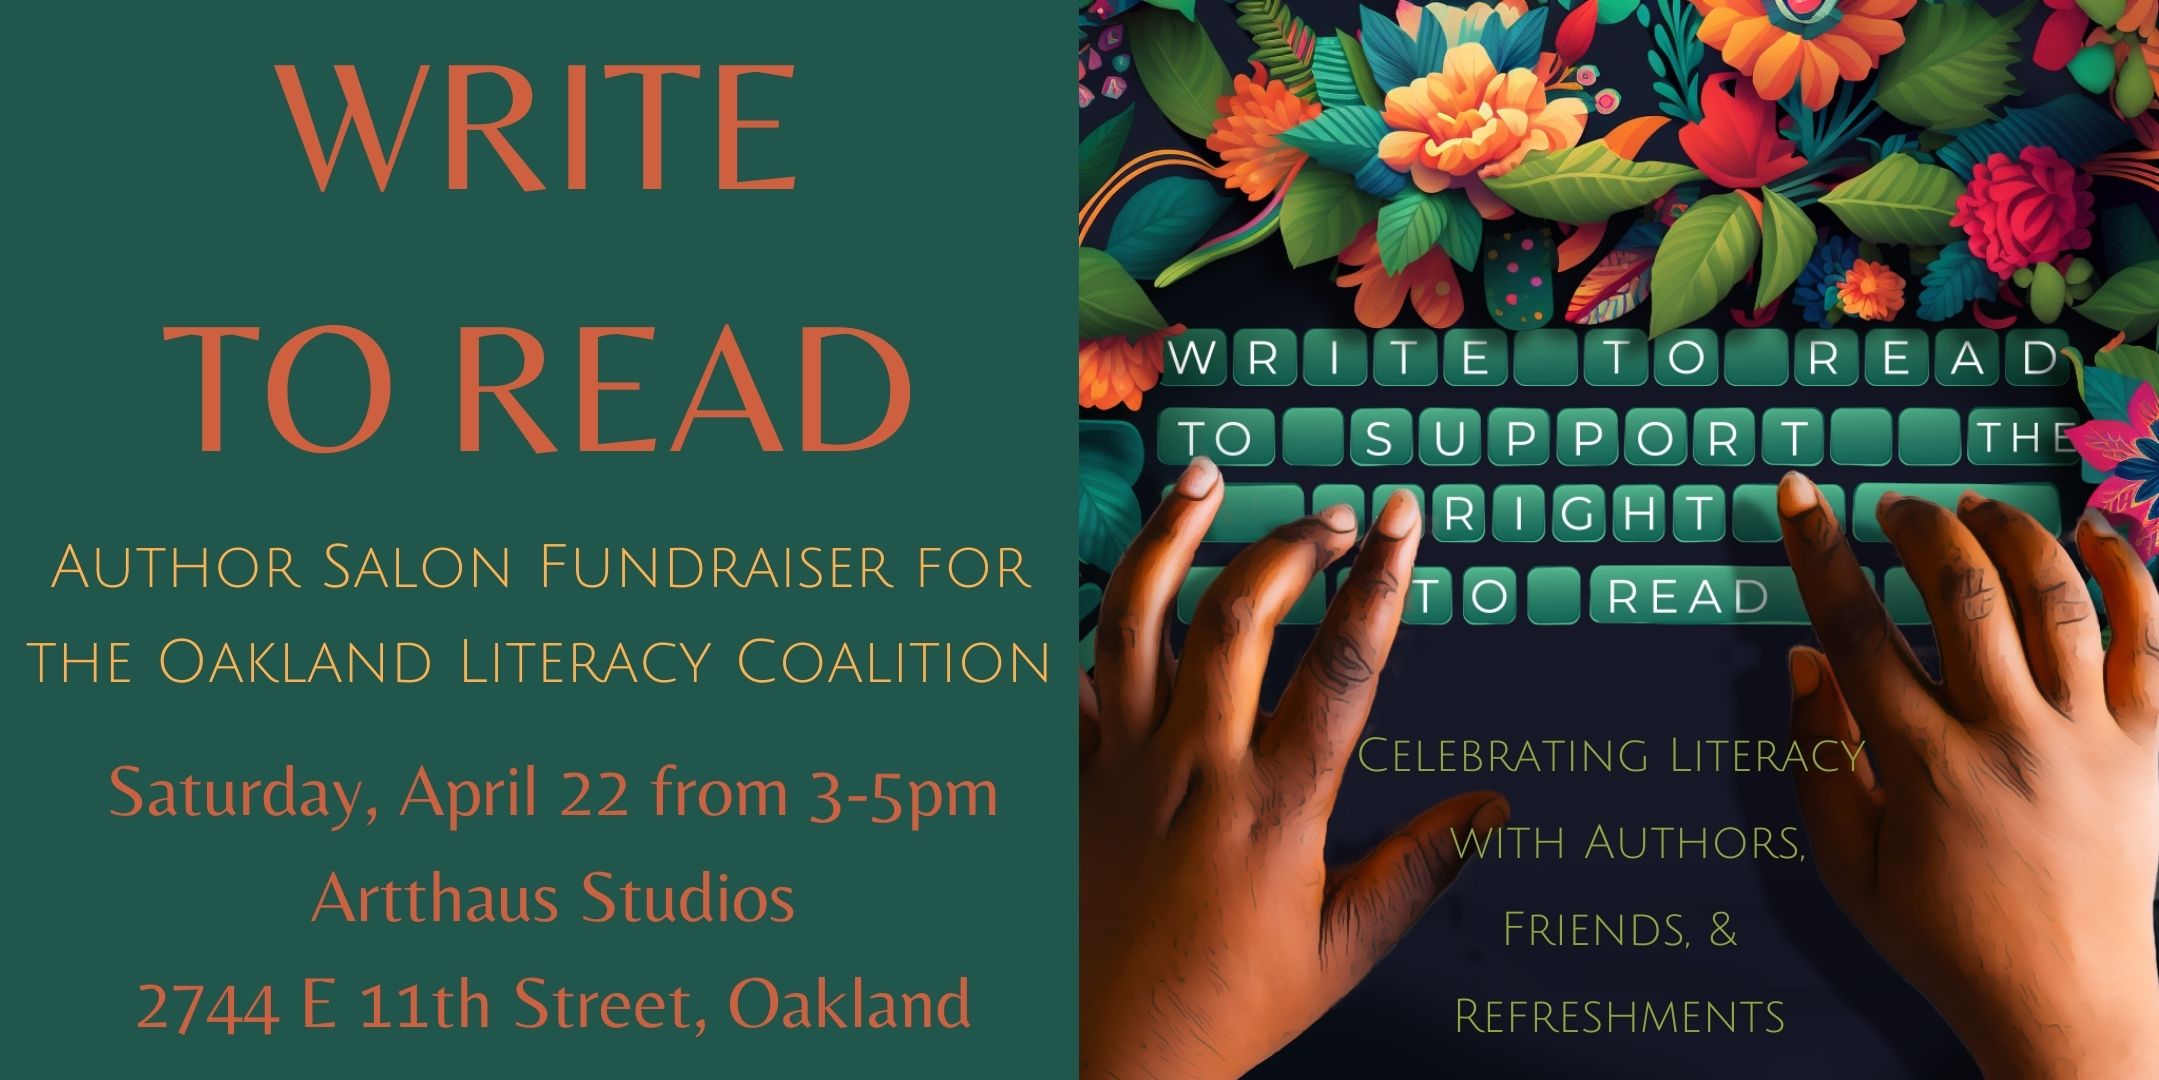 WRITE TO READ: Author Salon Fundraiser for the Oakland Literacy Coalition